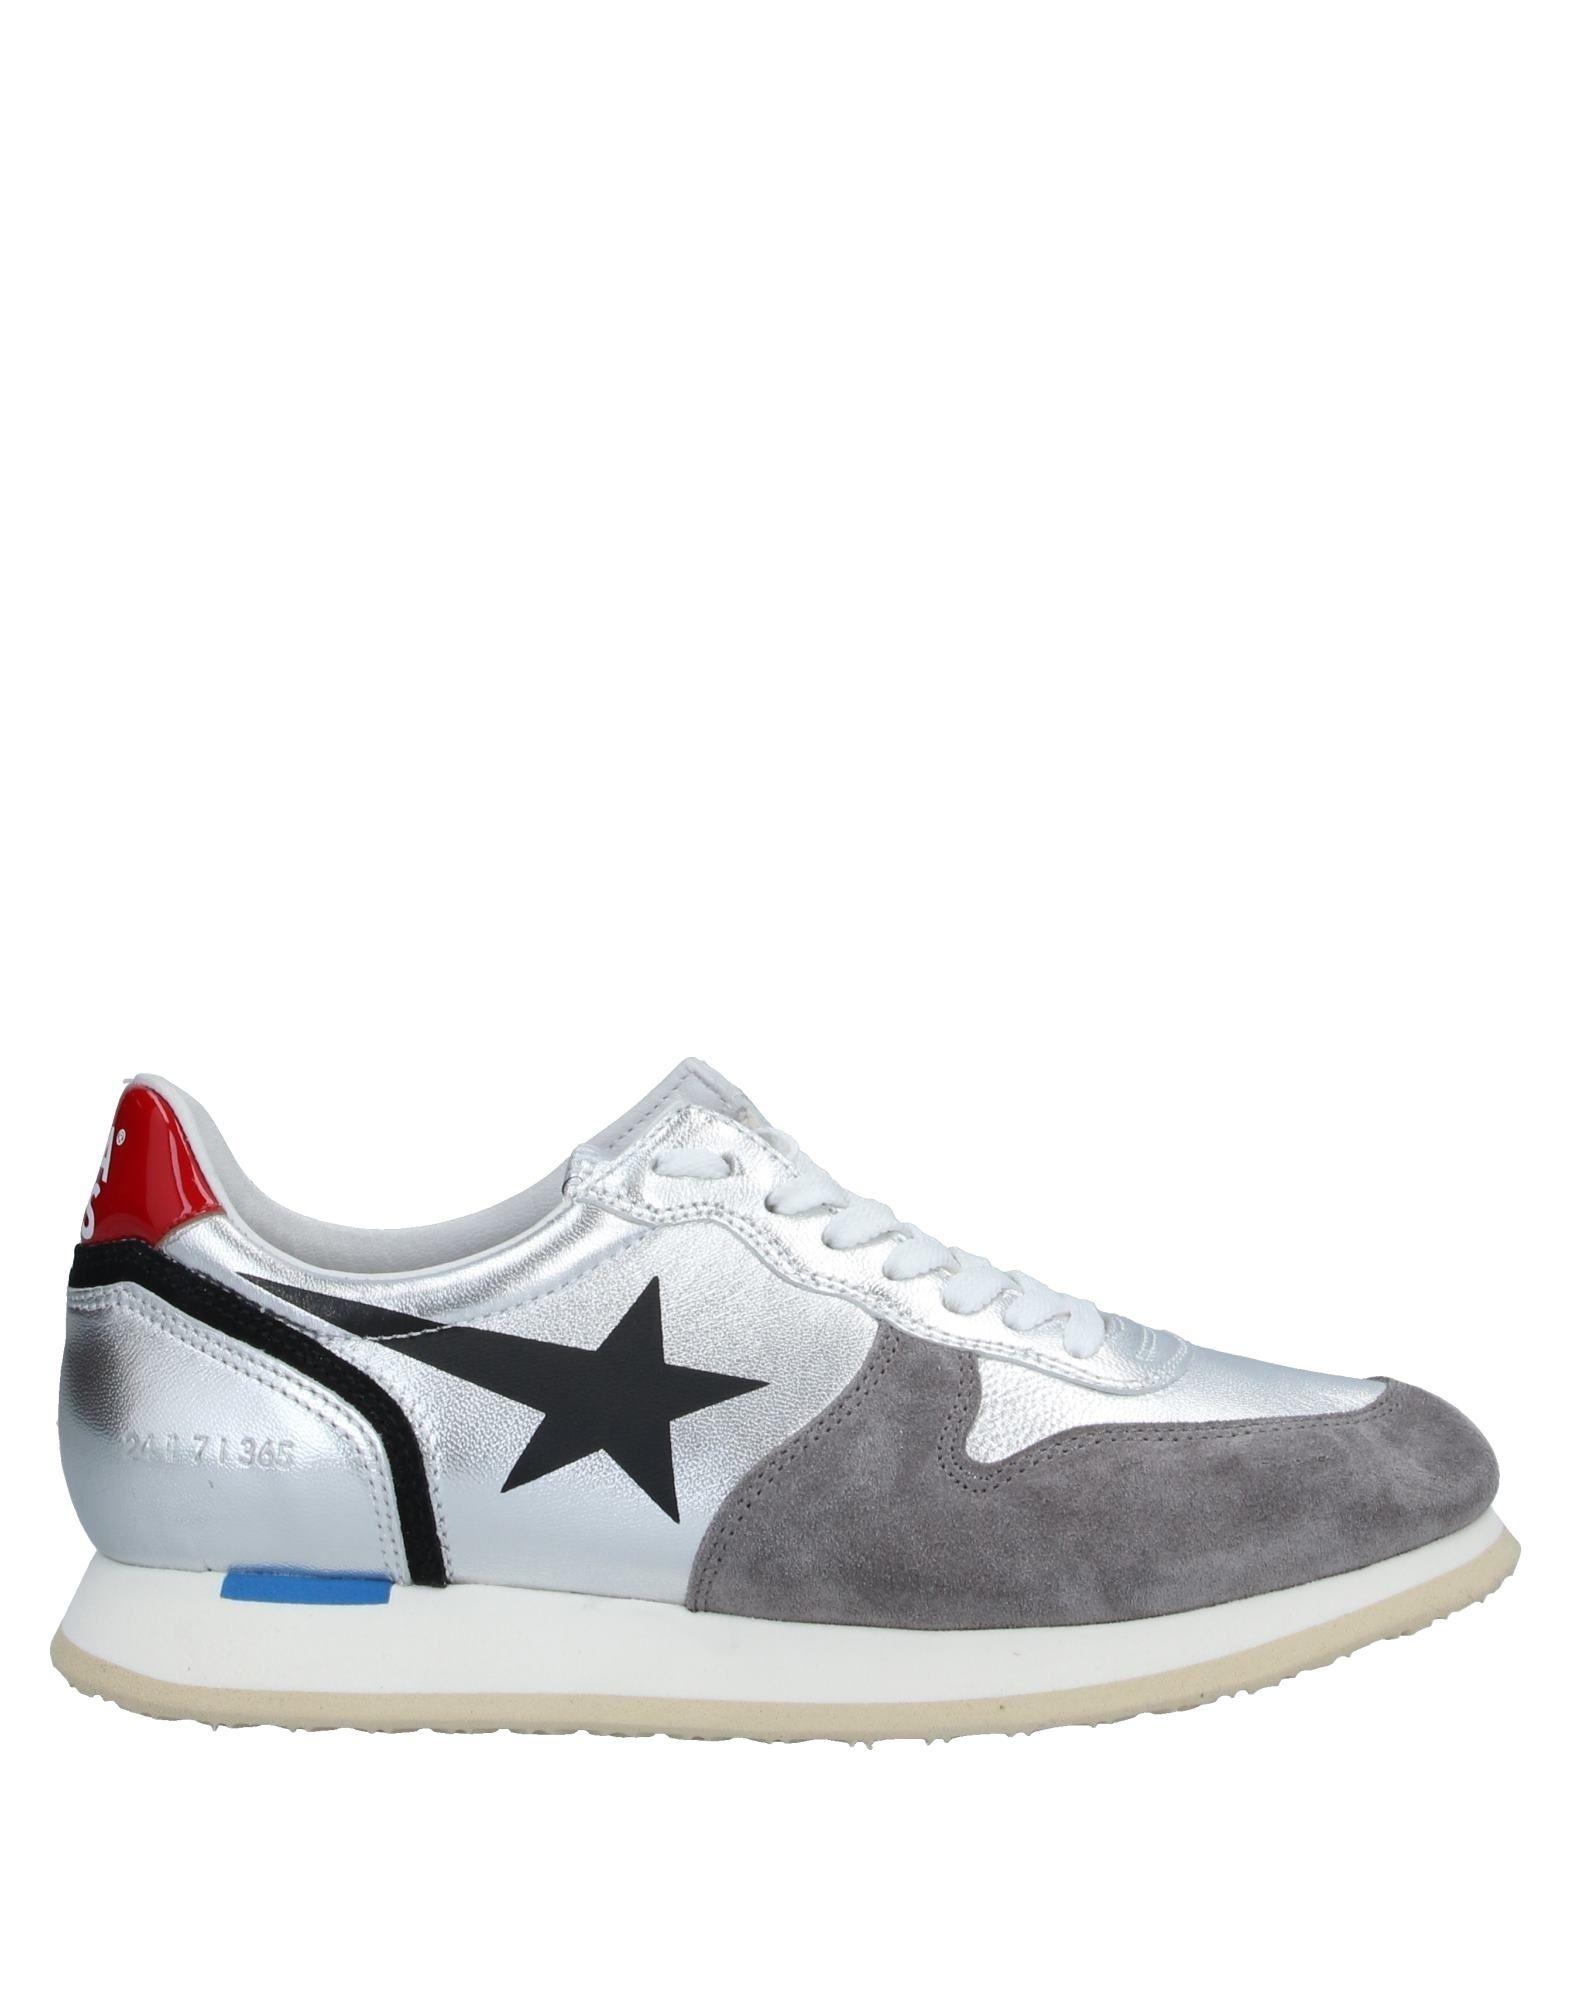 Haus By Golden Goose Deluxe Brand Rubber Low-tops & Sneakers in Silver ...